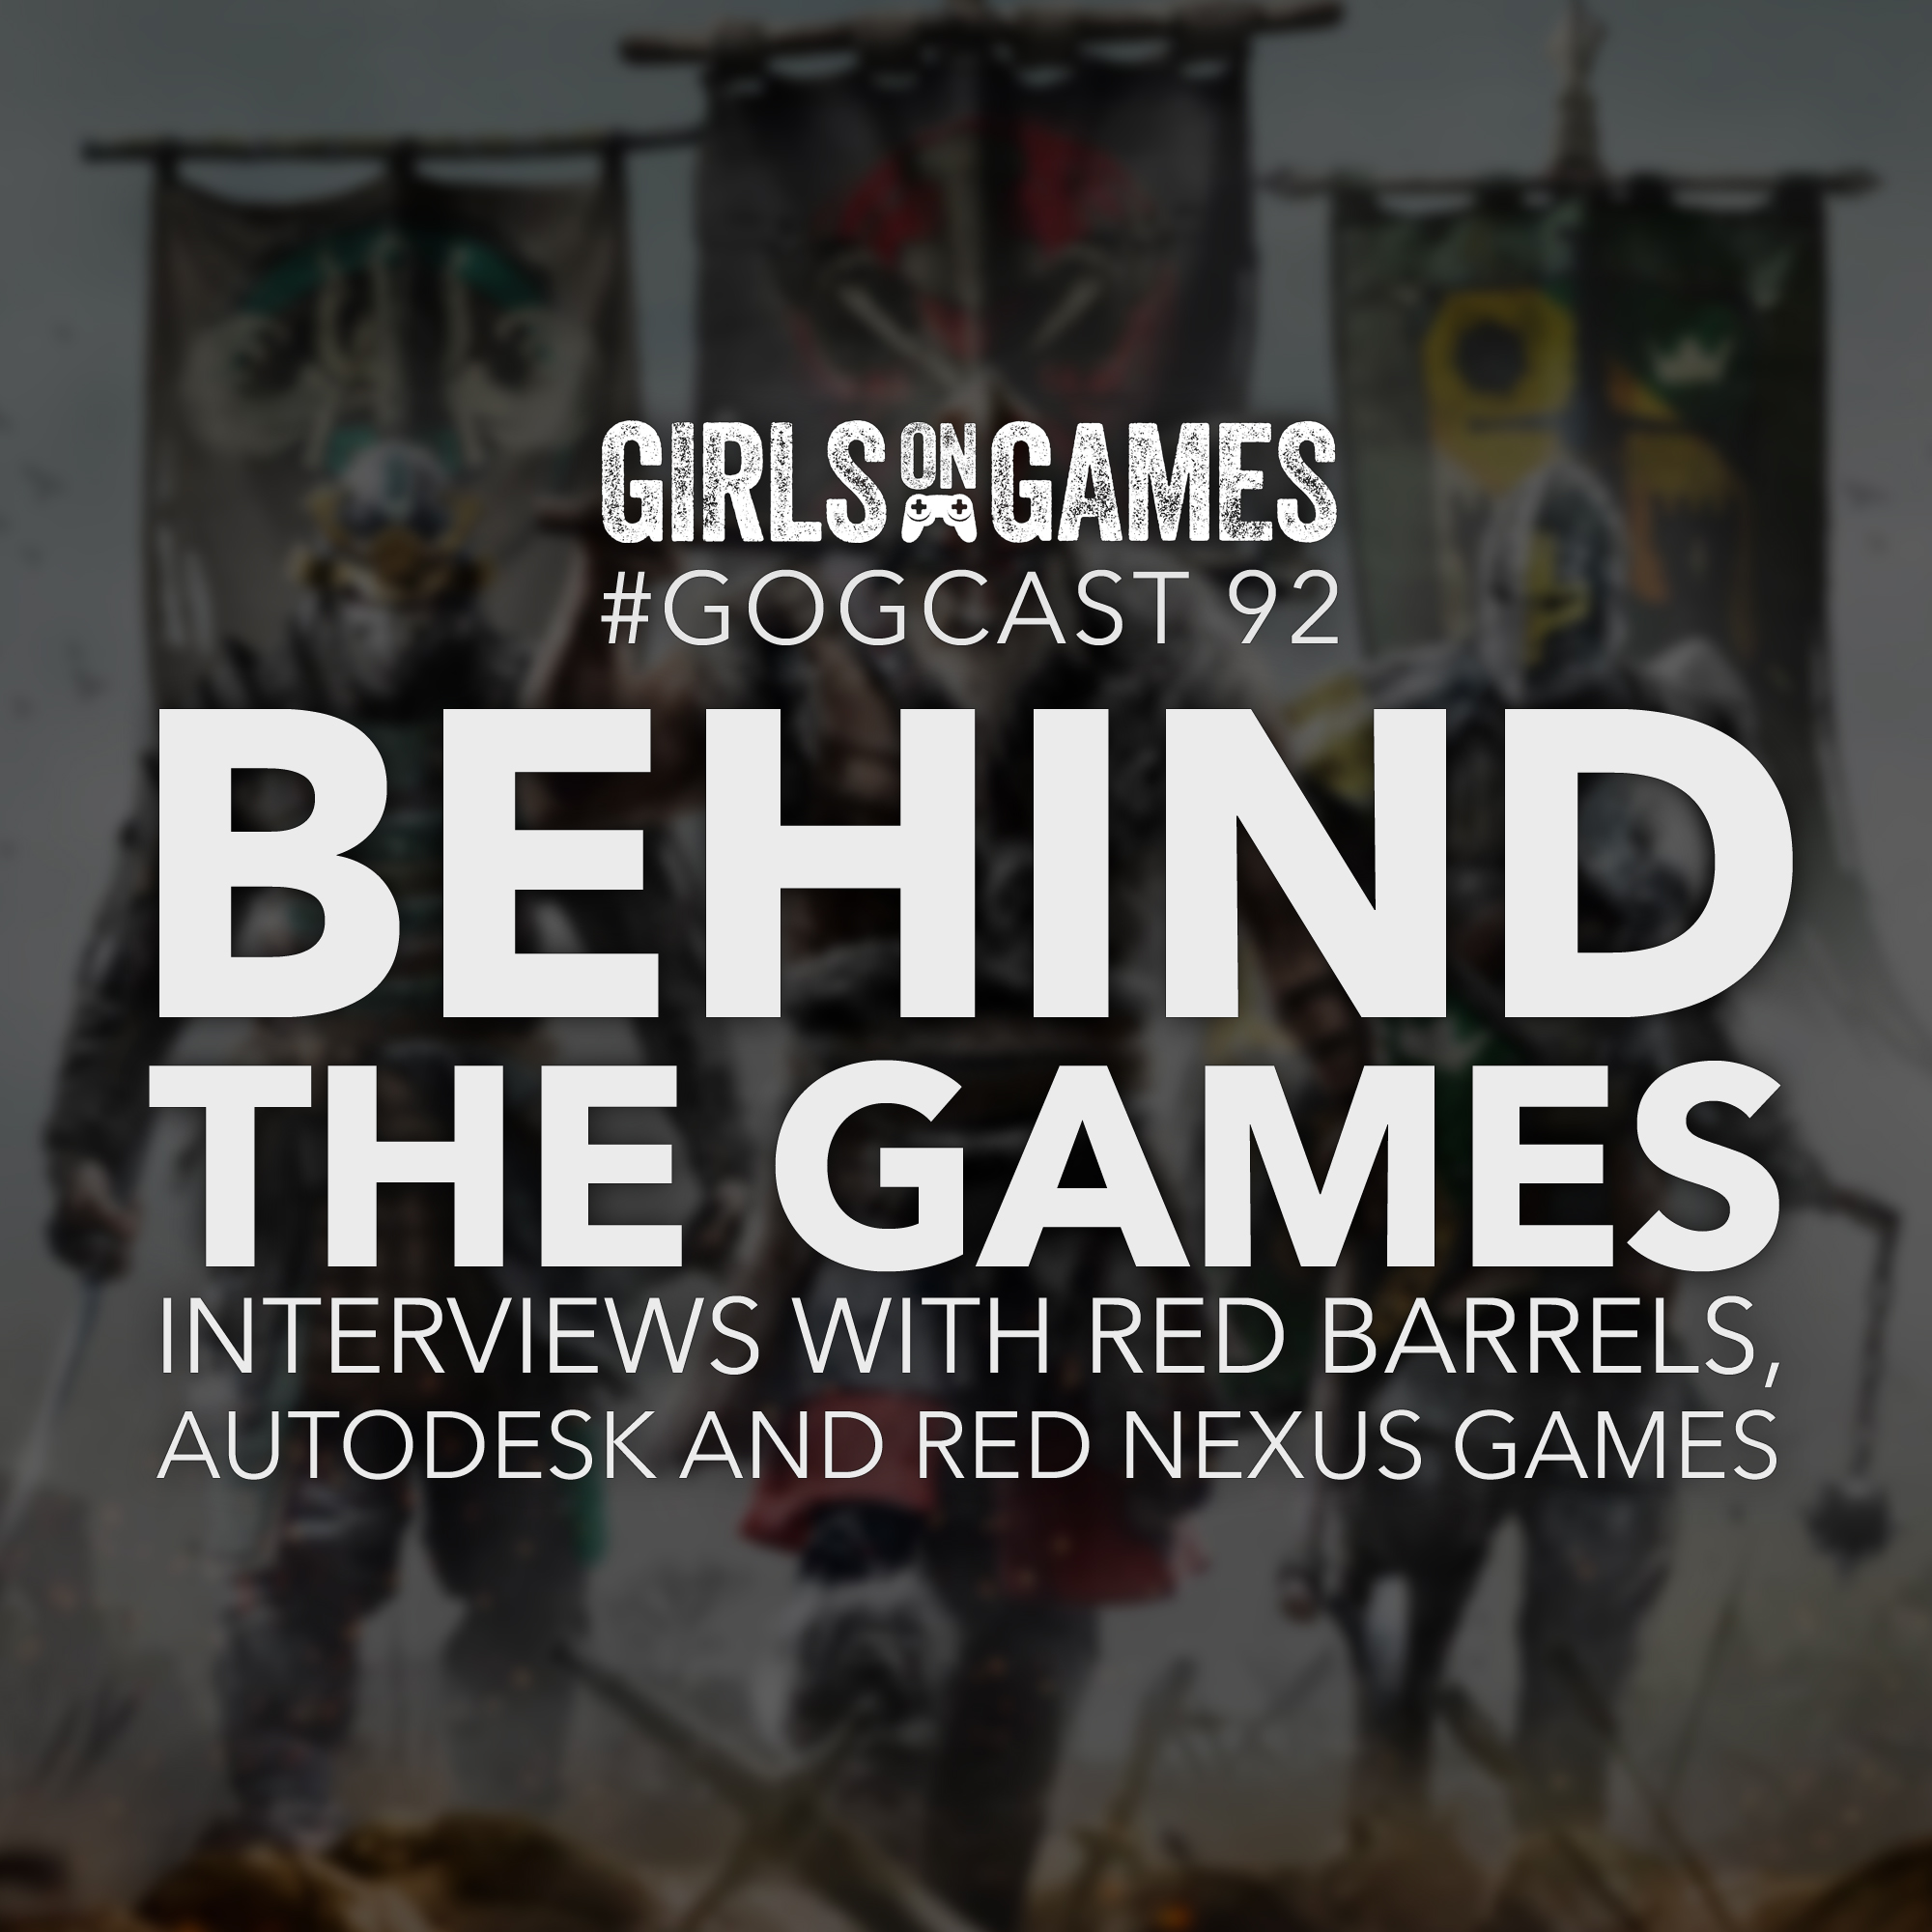 GoGCast 92: Behind the Games - interviews with Red Barrels, Autodesk and Red Nexus Games